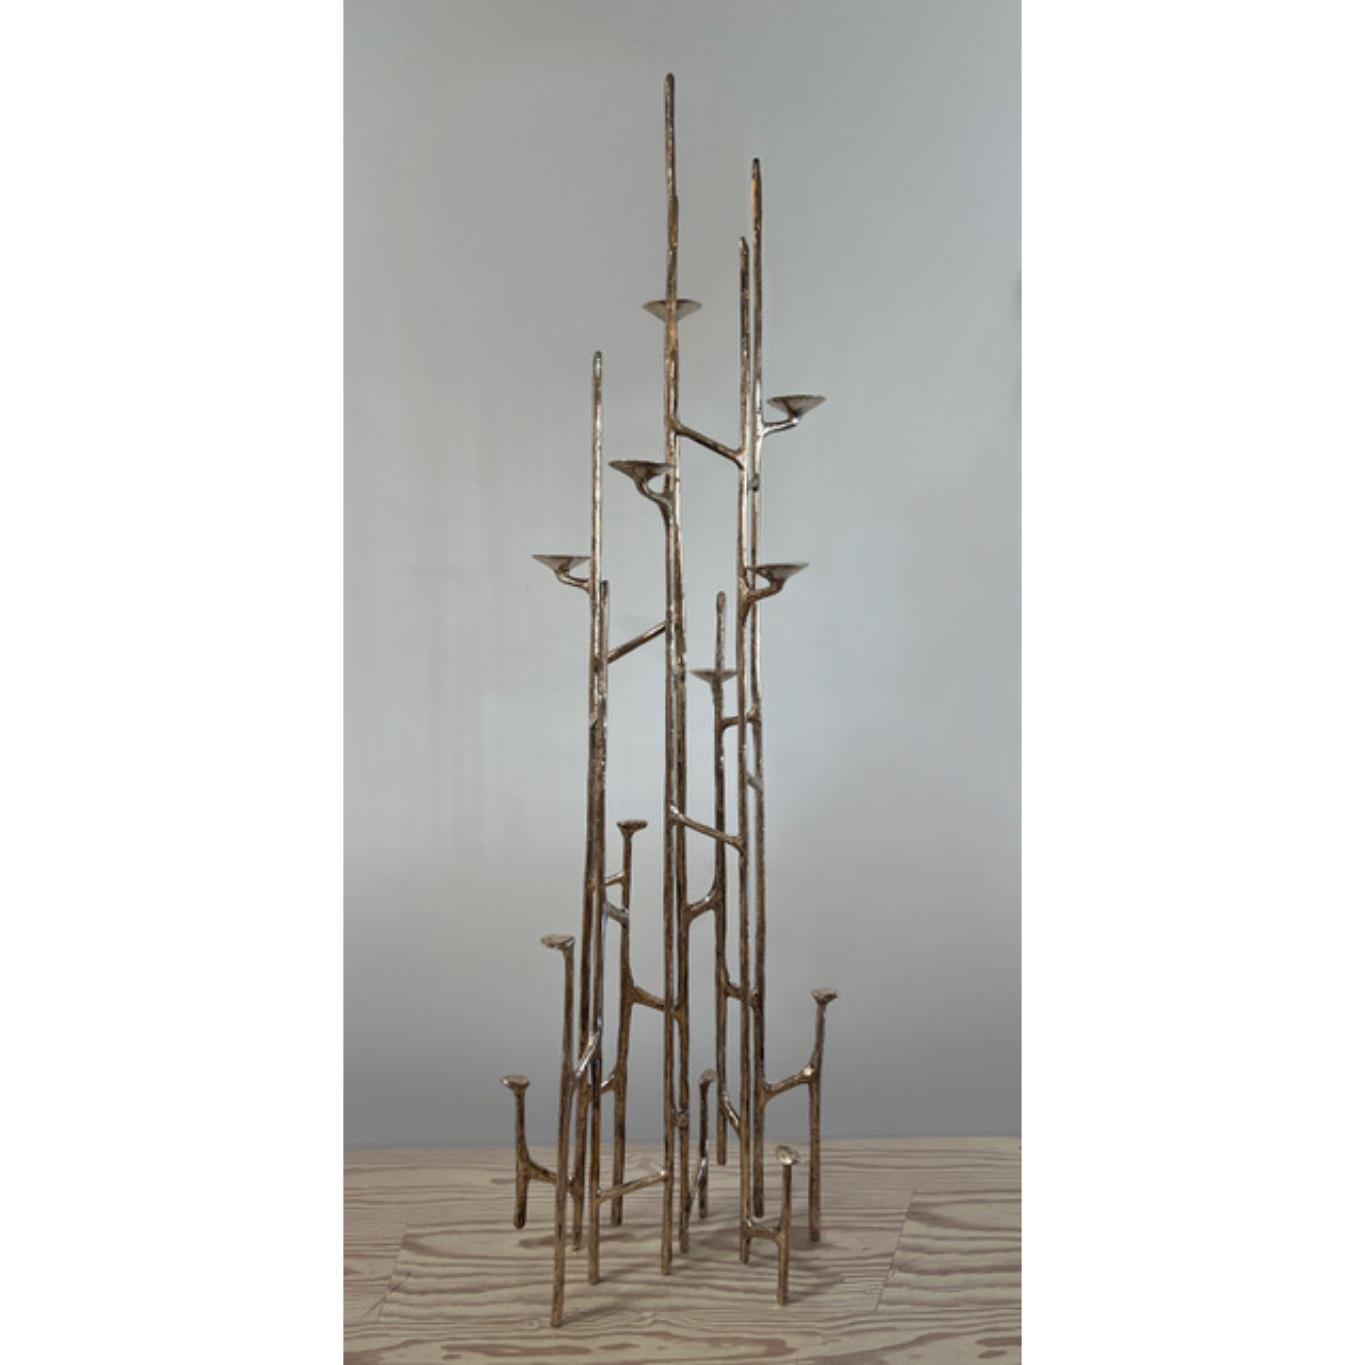 Polished bronze floor candelabra by Mary Brogger.
Dimensions: W 33 cm x D 66 cm x H 200 cm.
Materials: Polished bronze.

Mary Brogger is an internationally recognized artist whose diverse practice includes sculpture and site-responsive